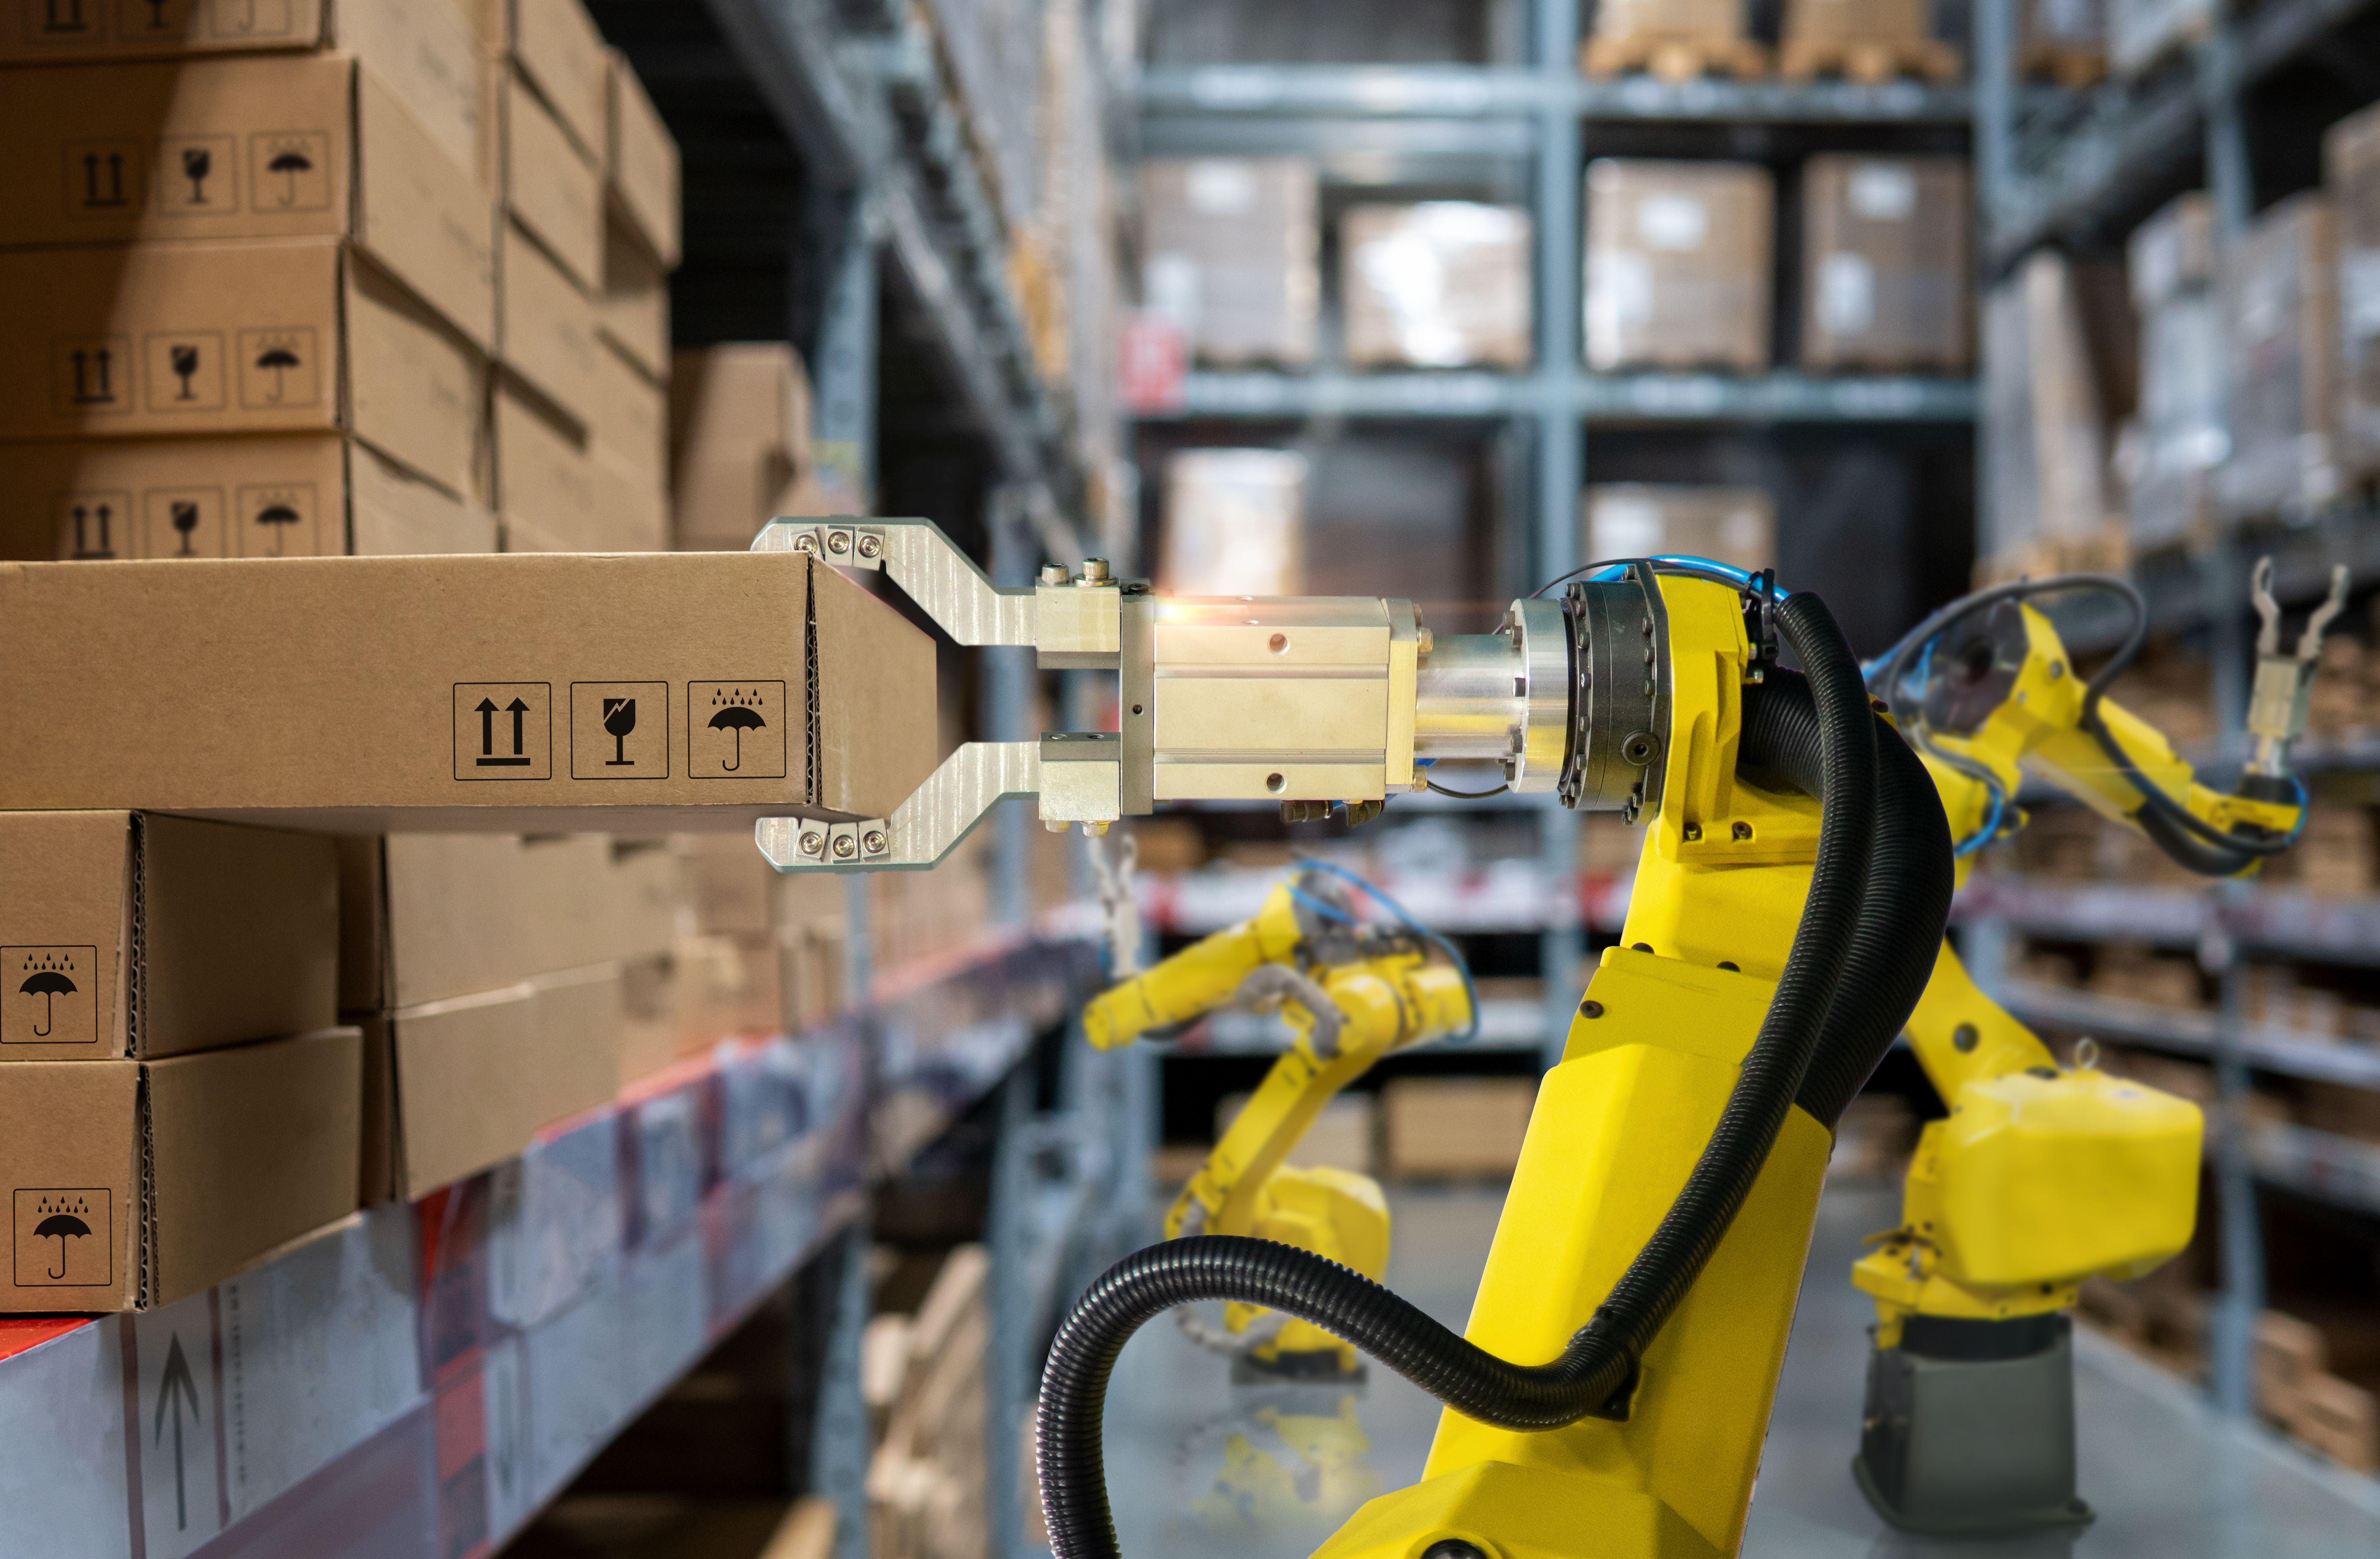 Getting Started with Robotics and Wearable Tech for the Novice 3PL Warehouse